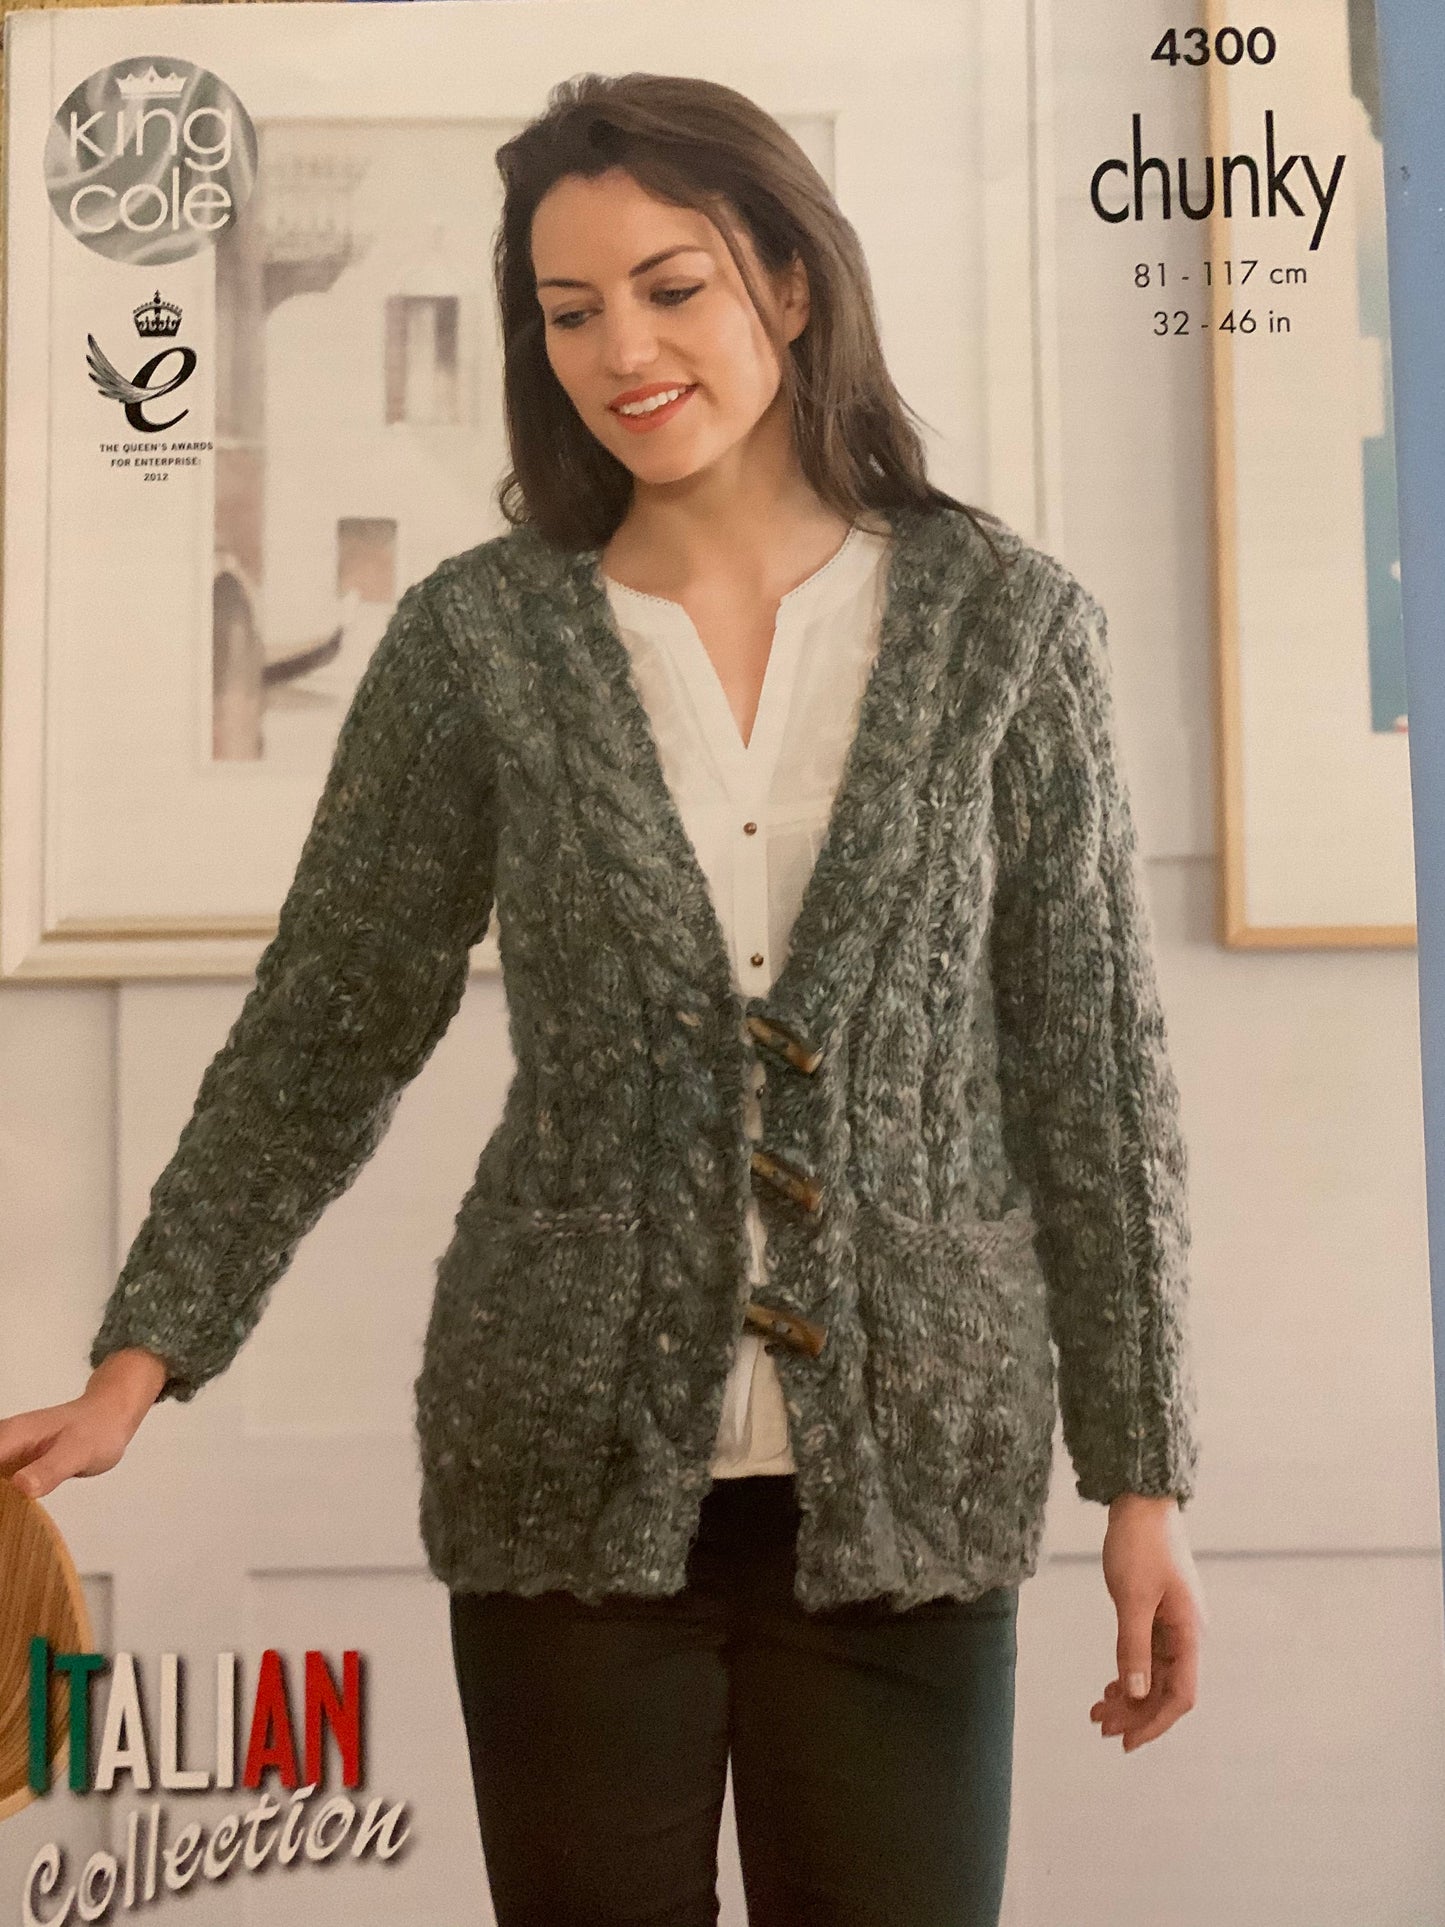 4300 King Cole chunky ladies jacket and sweater knitting pattern